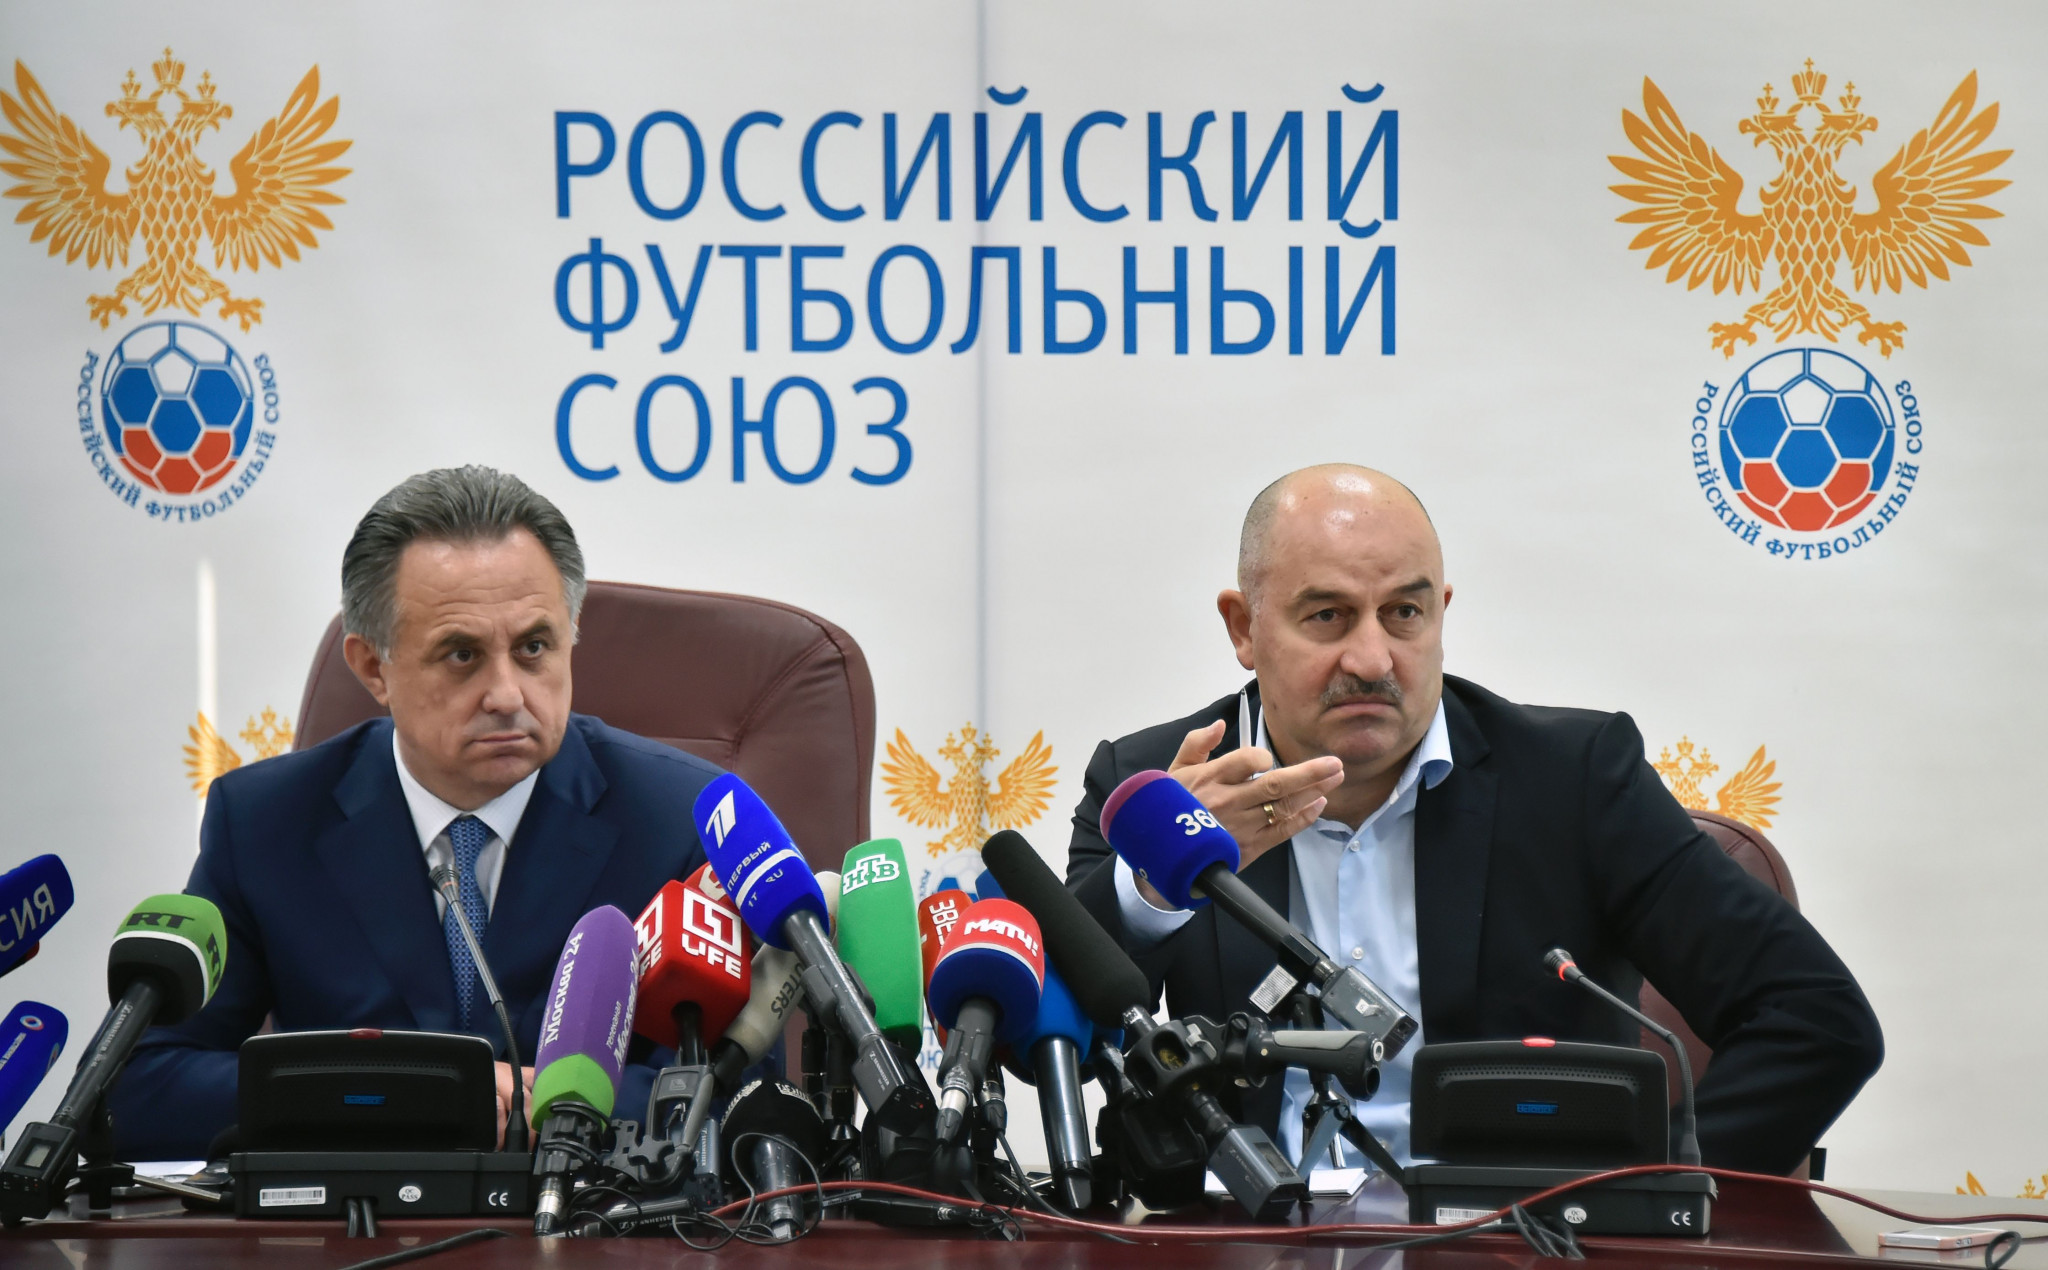 Vitaly Mutko, left, resigned from his role as President of the Russian Football Union to fight his lifetime Olympic ban given to him by the IOC following publication of the McLaren Report ©Getty Images